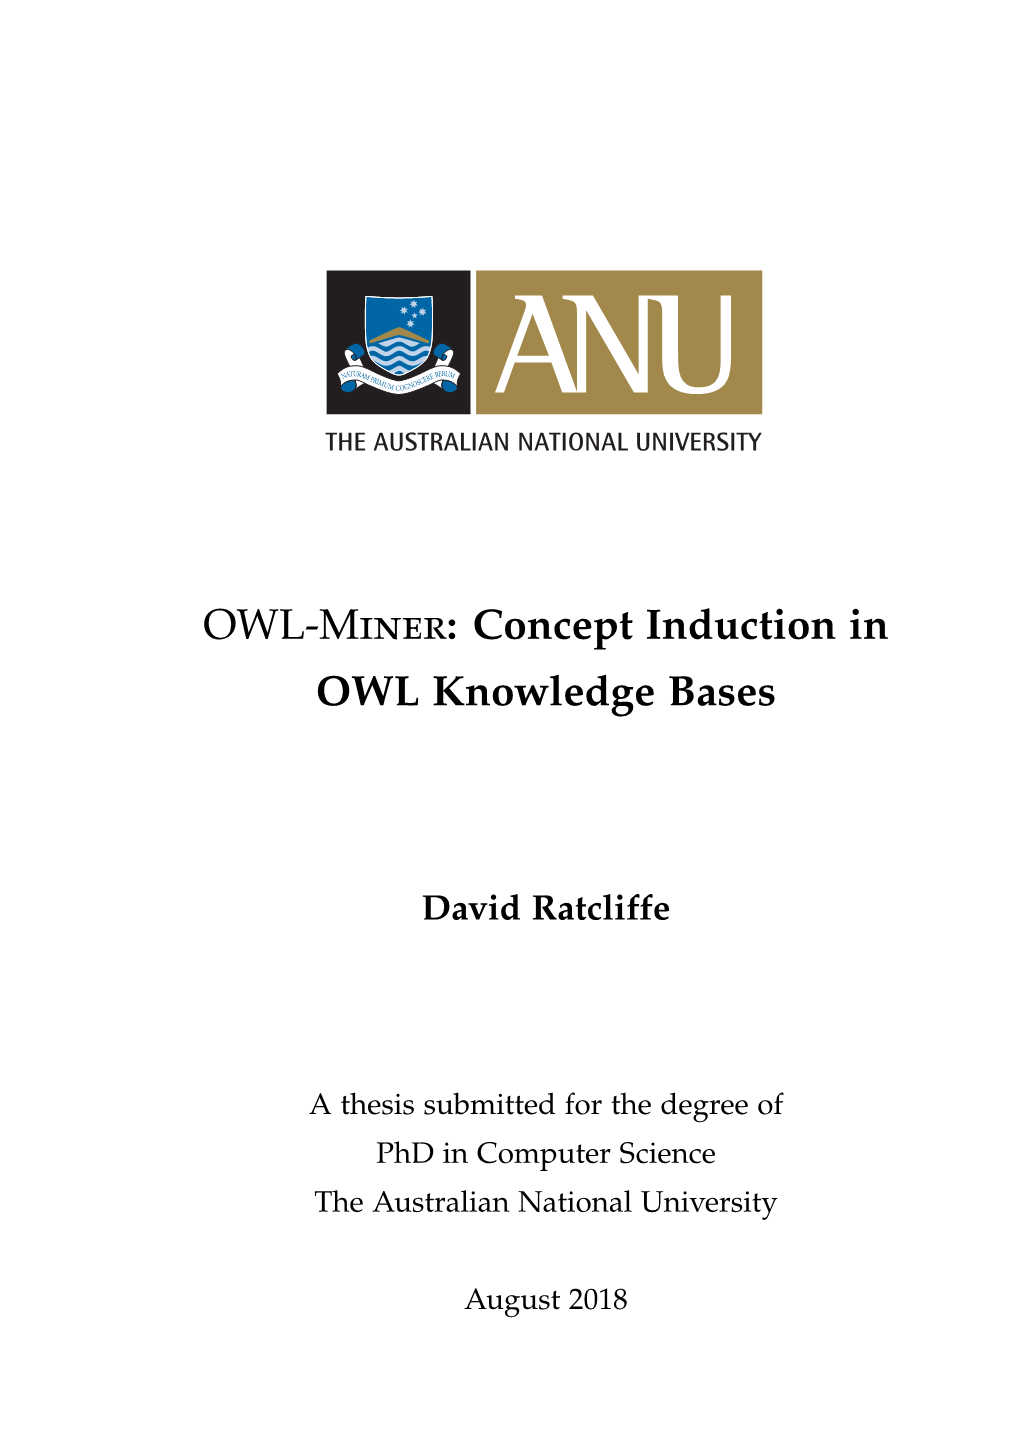 OWL-Miner: Concept Induction in OWL Knowledge Bases